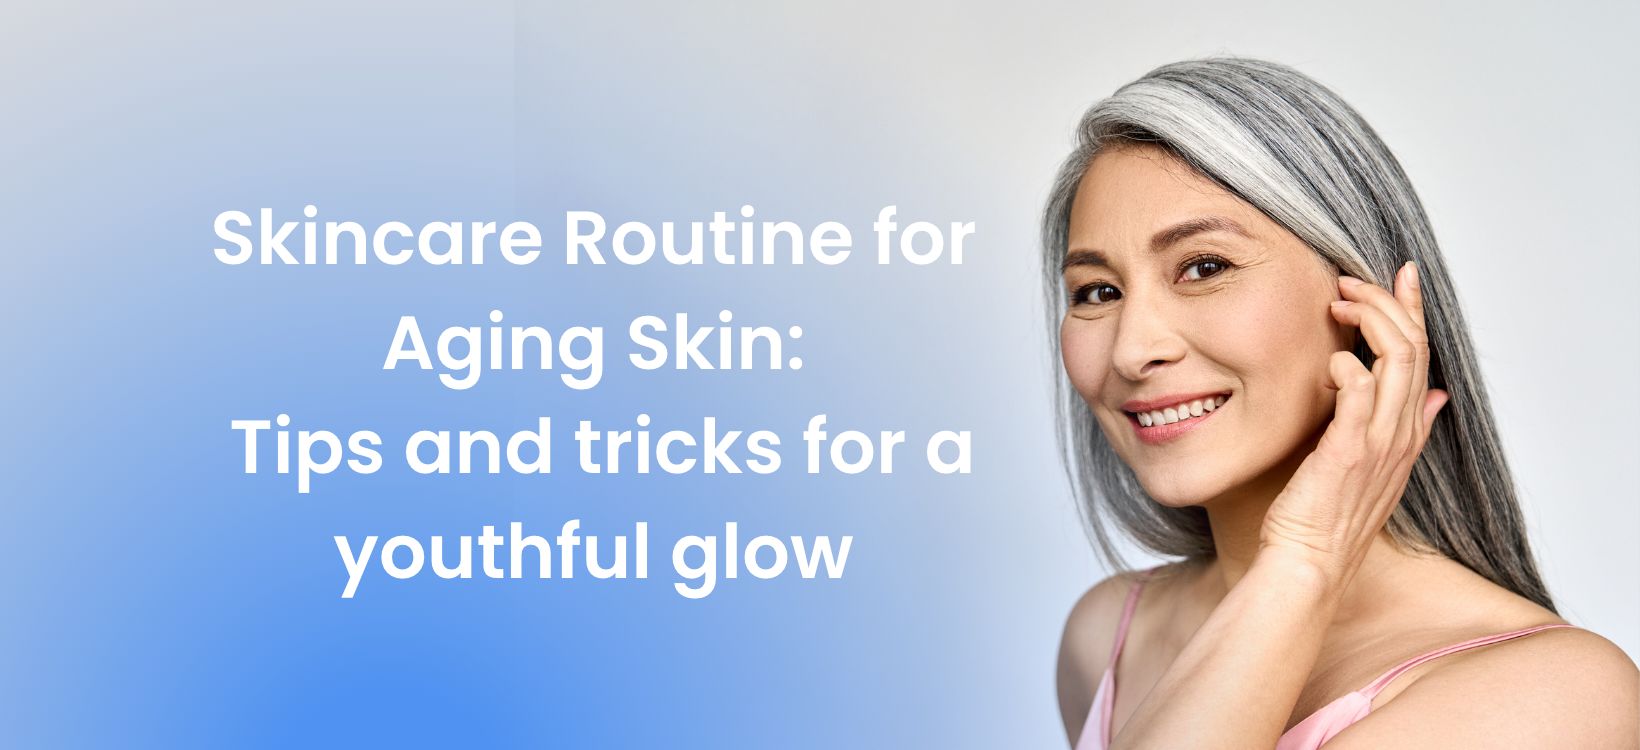 Skincare Routine for Aging Skin: Tips and tricks for a youthful glow